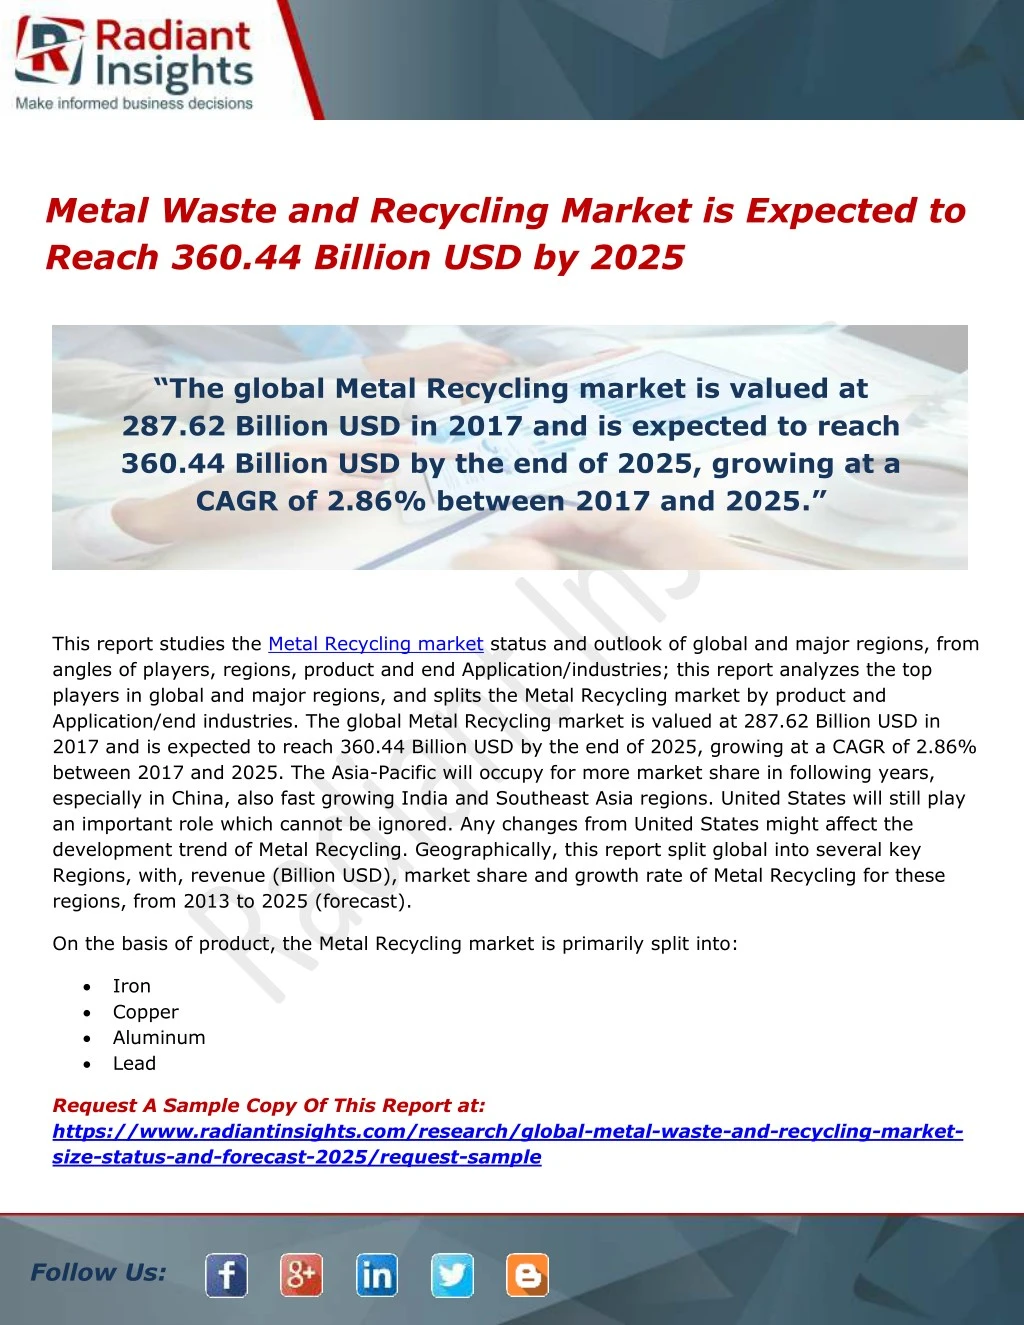 metal waste and recycling market is expected